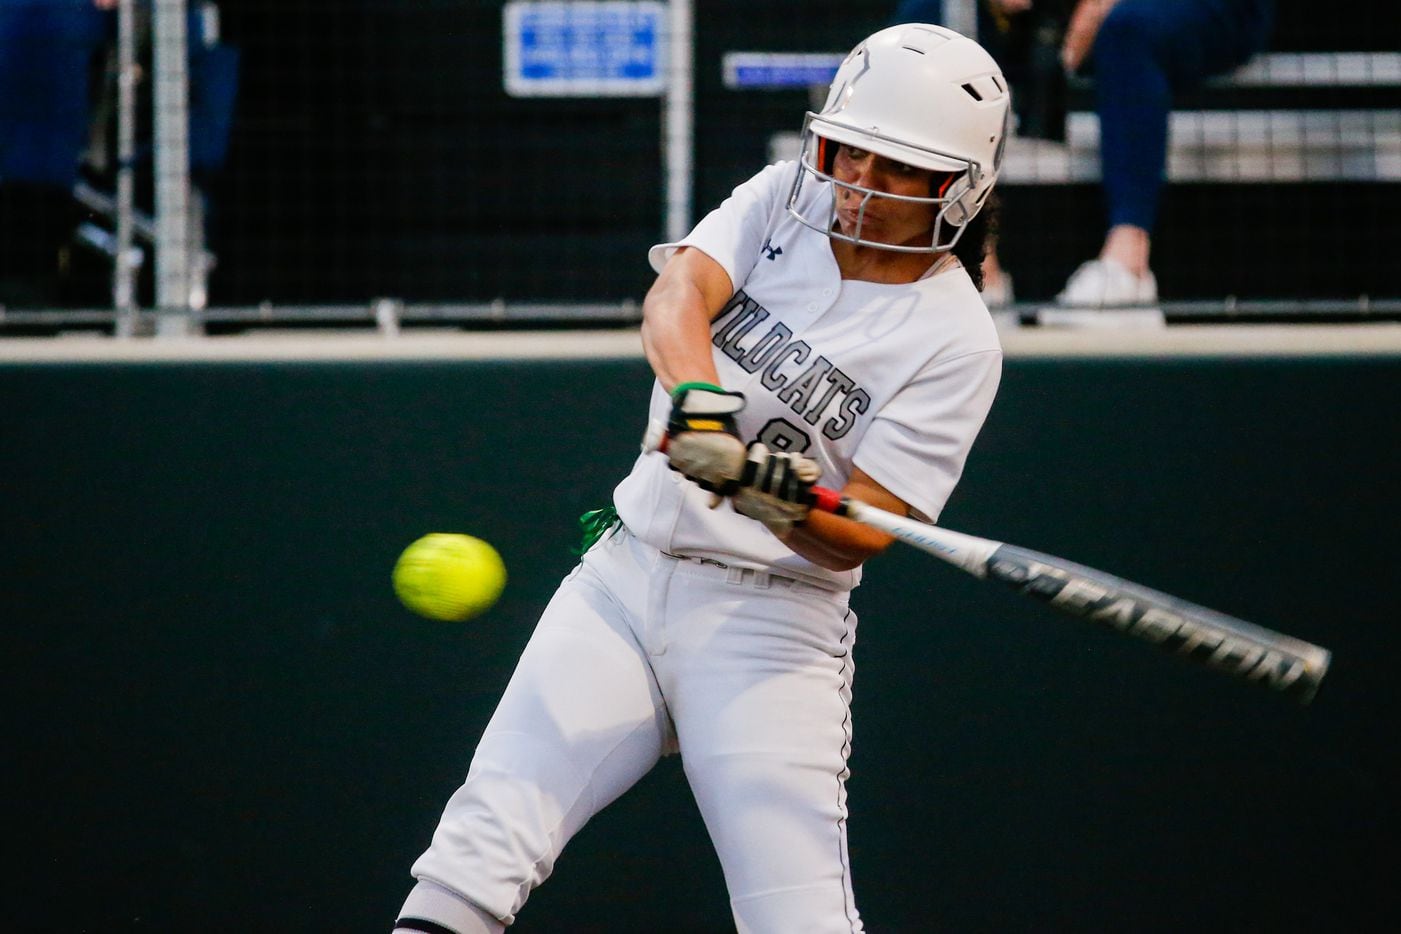 Denton Guyer's Tehya Pitts (8) swings at the ball from Keller during the third inning of a nondistrict softball game in Denton on Tuesday, March 30, 2021. (Juan Figueroa/ The Dallas Morning News)